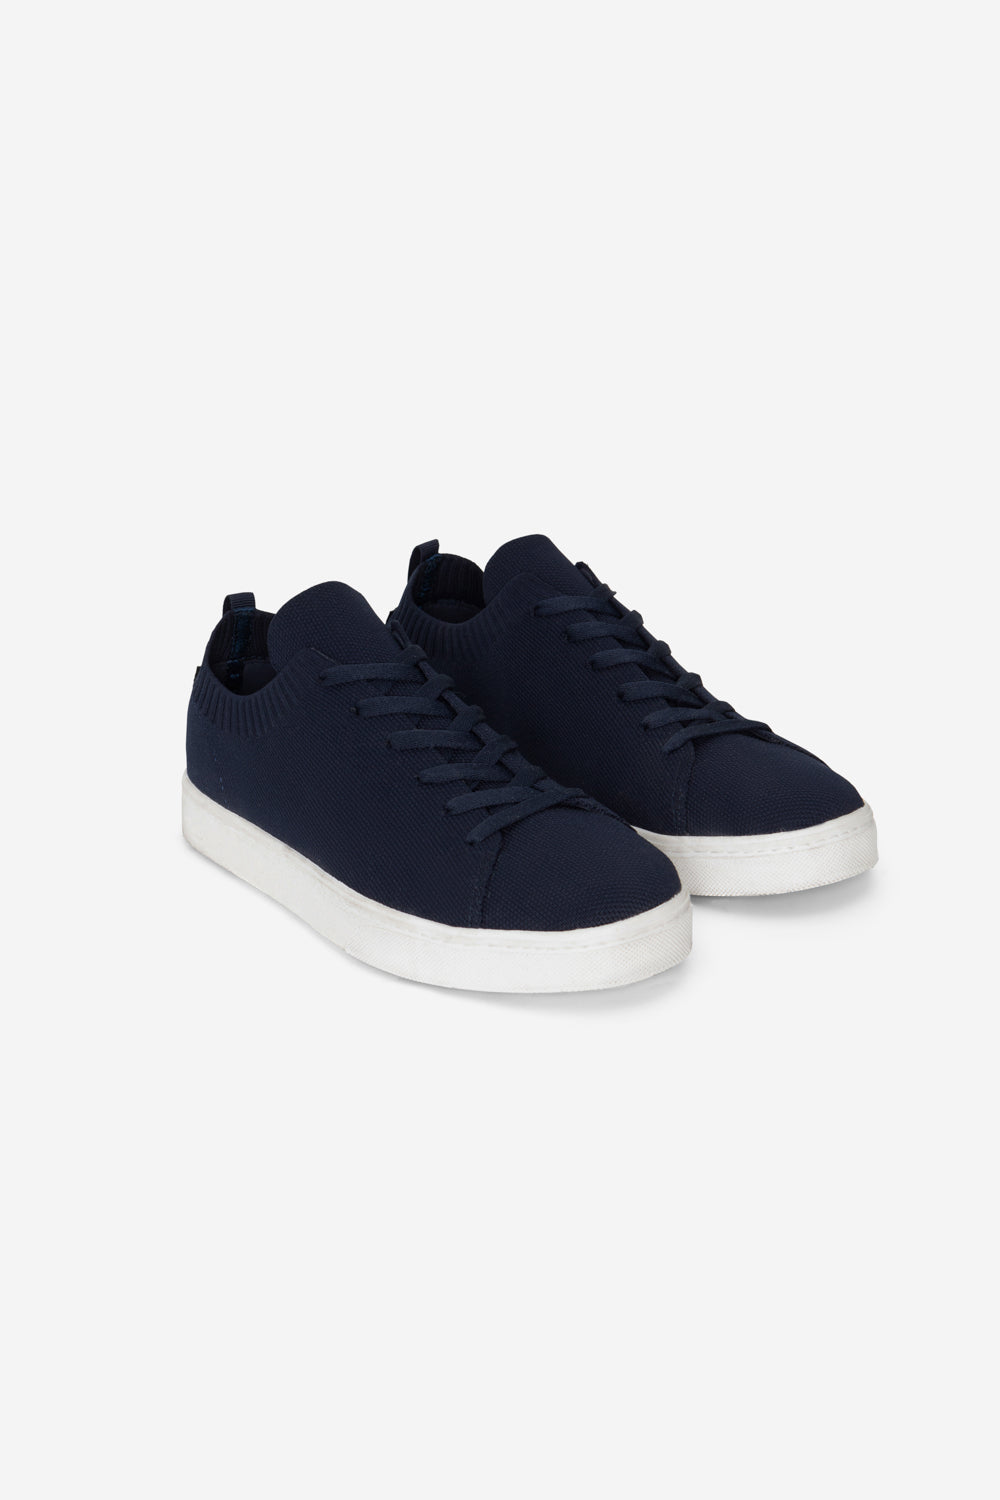 SANDFORD KNIT TRAINERS DEEP NAVY